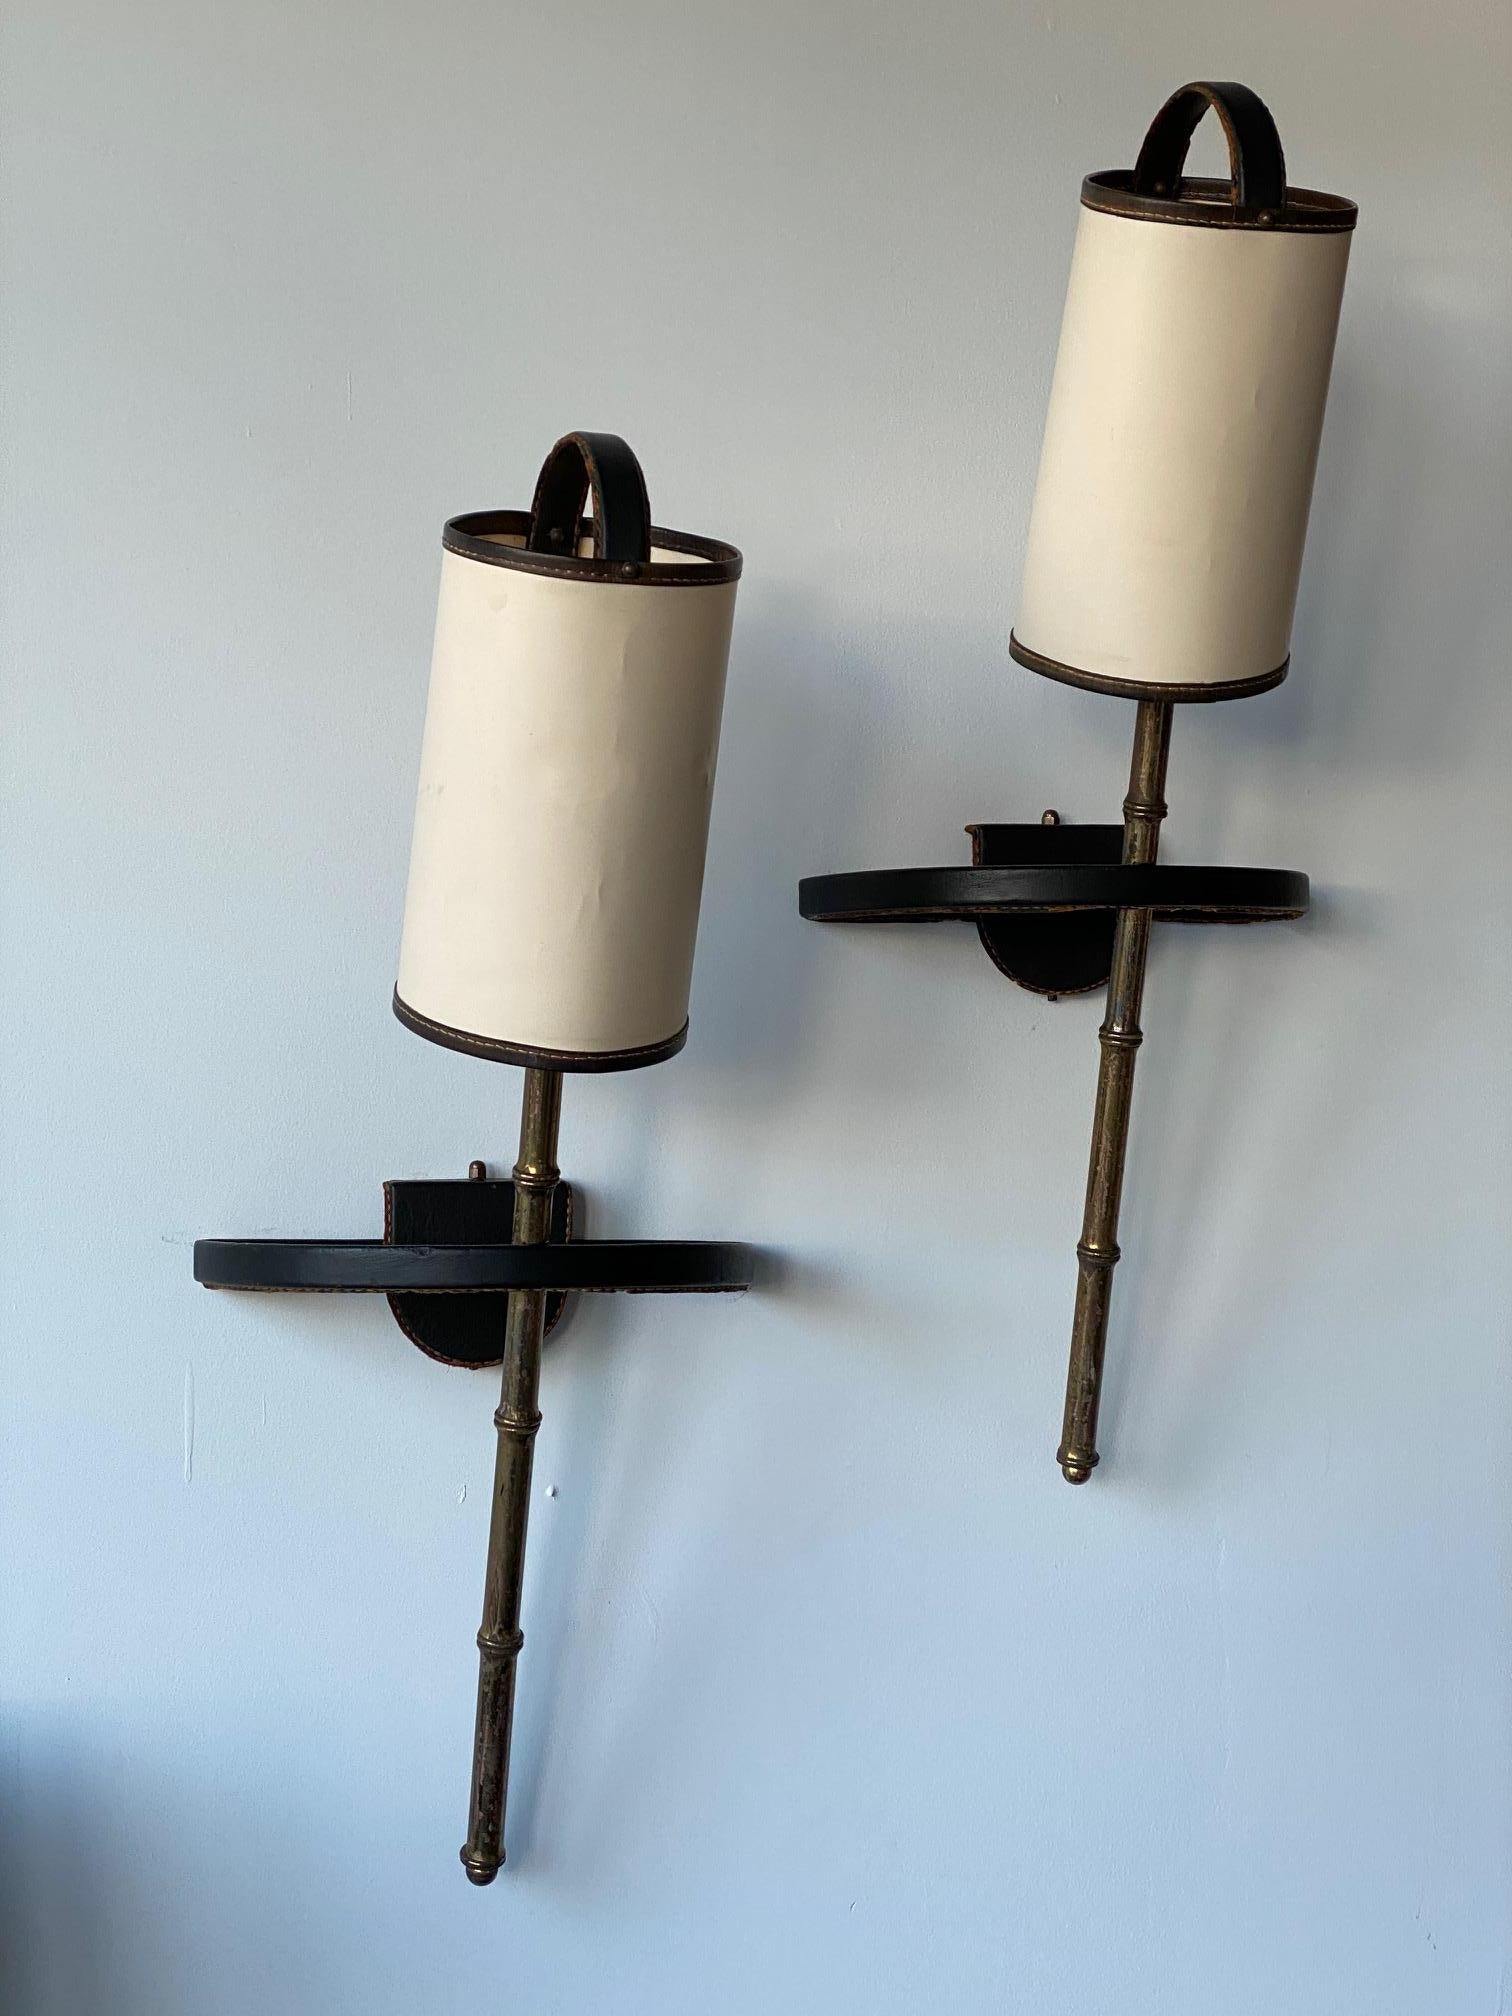 A pair of sconces / wall lamps by French Art Deco Modernist designer, architect, and interior designer, Jacques Adnet. A beautiful set of lights in leather and brass with paper shades.
Acquired from DeLorenzo 1950, New York, by the present owner,